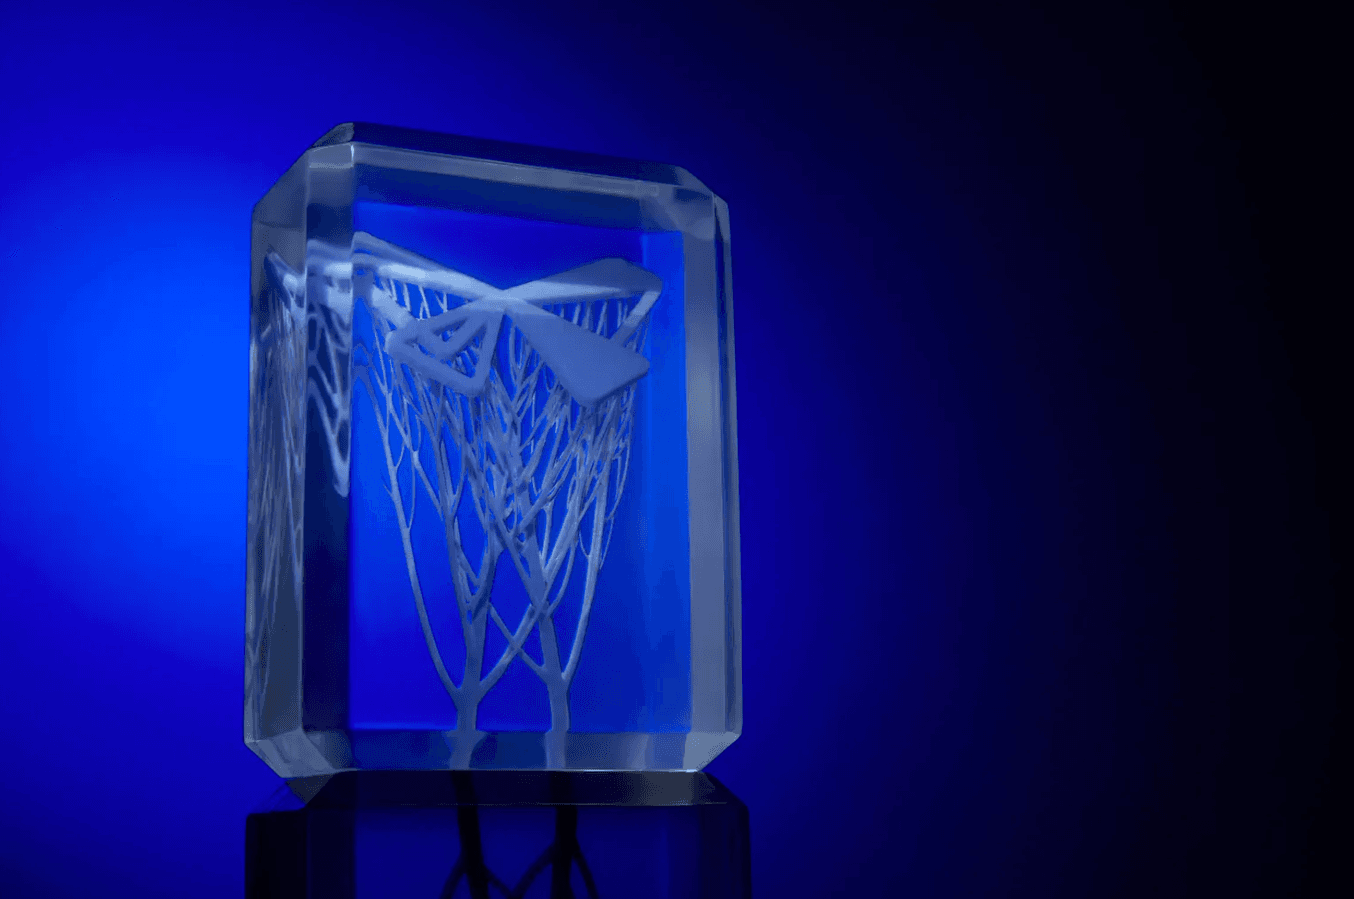 3D printed award printed by nervous system